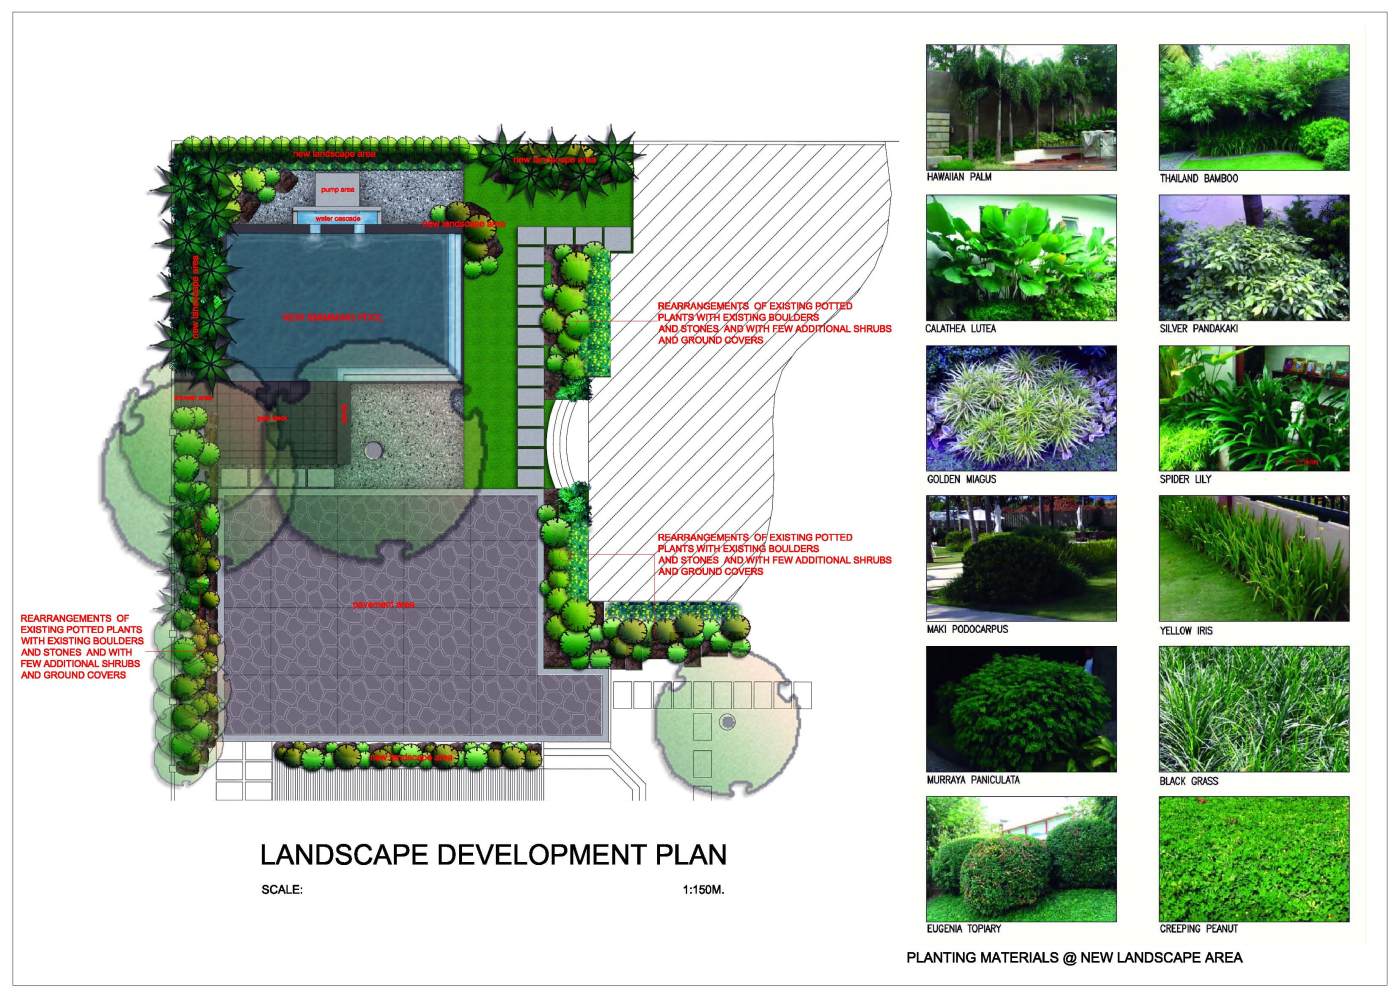 RESIDENCE LANDSCAPE 1 A3 -SWIMMING POOL  AREA (2) (1)